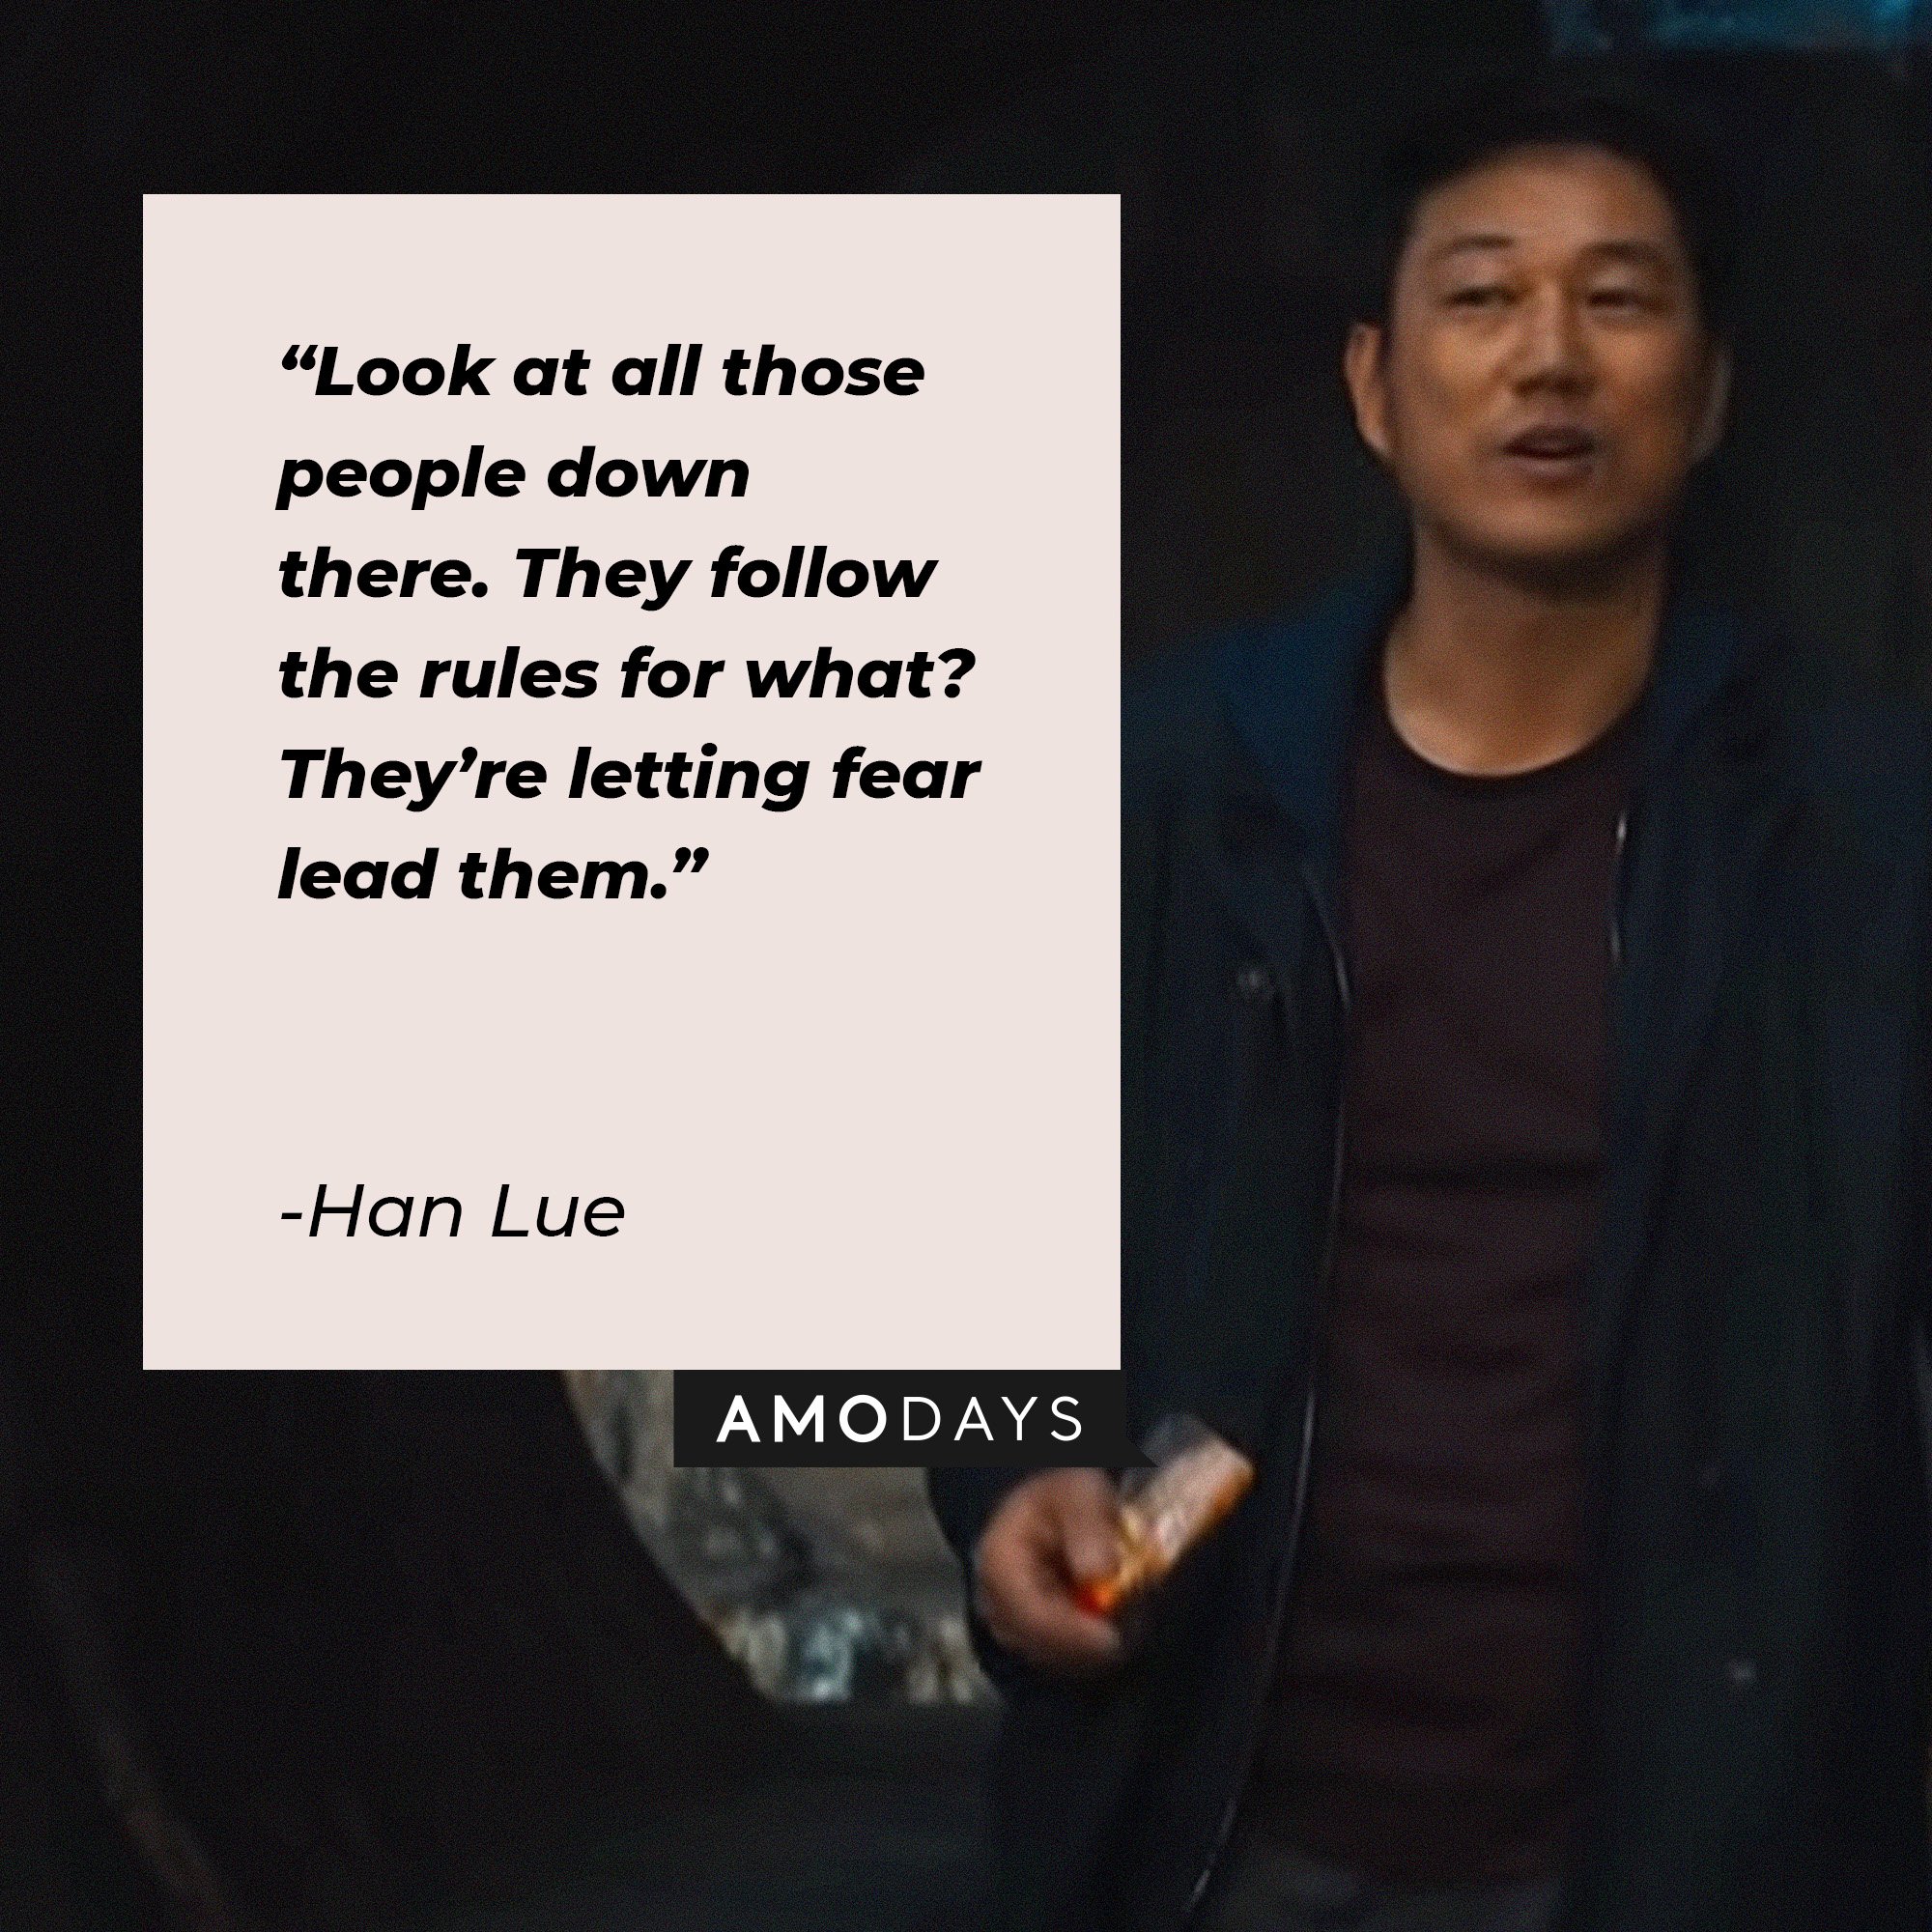 Han Lue's quote: “Look at all those people down there. They follow the rules for what? They’re letting fear lead them.” │Image: AmoDays